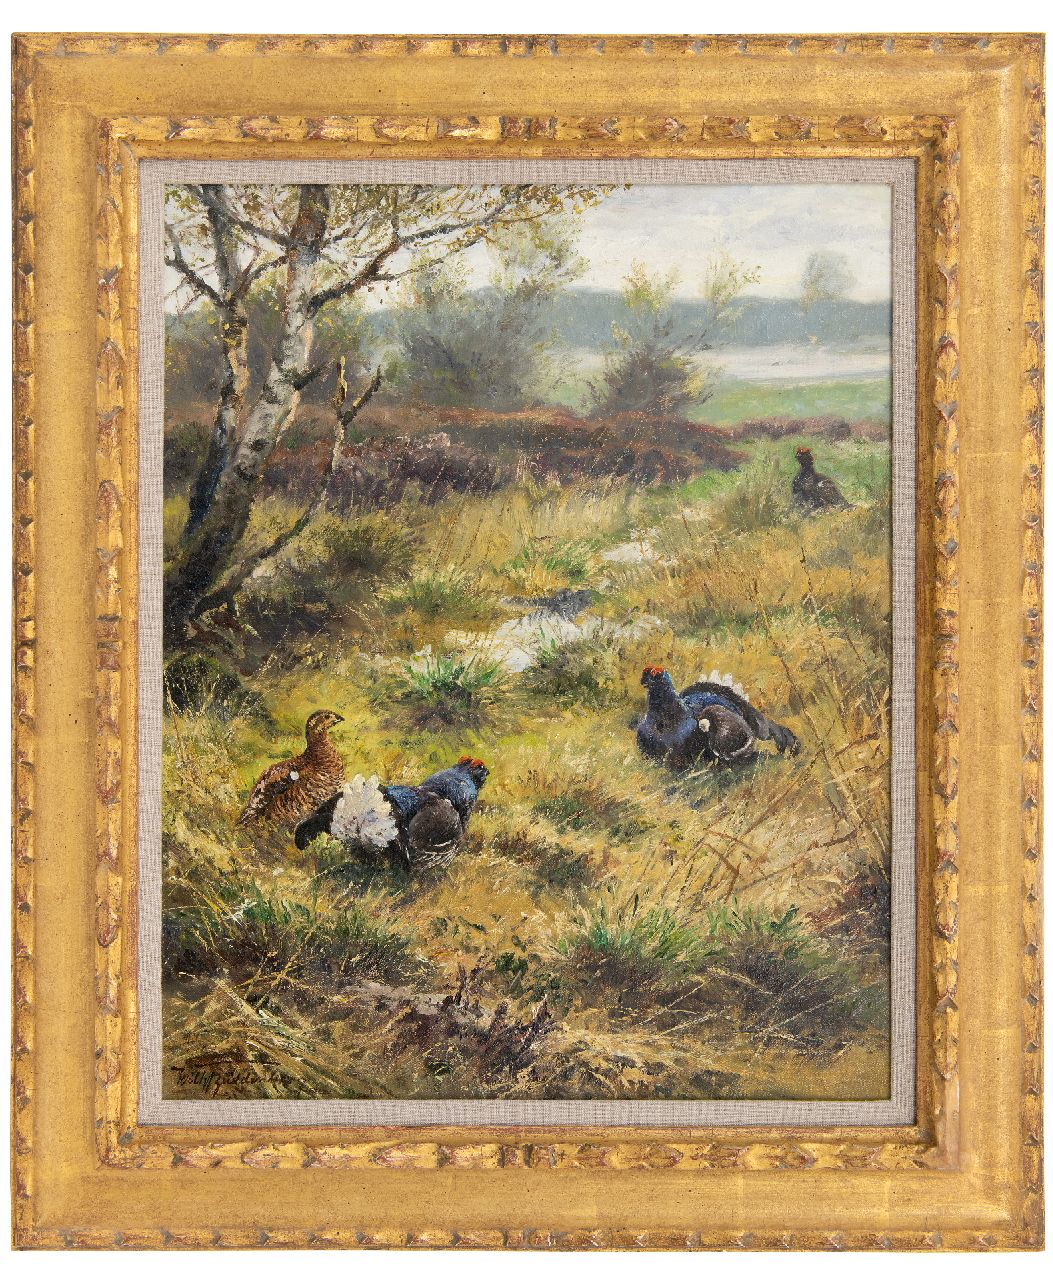 Buddenberg W.H.F.  | 'Wilhelm' Hermann Friedrich Buddenberg | Paintings offered for sale | Black grouses on the heath, oil on canvas 50.1 x 40.0 cm, signed l.l.